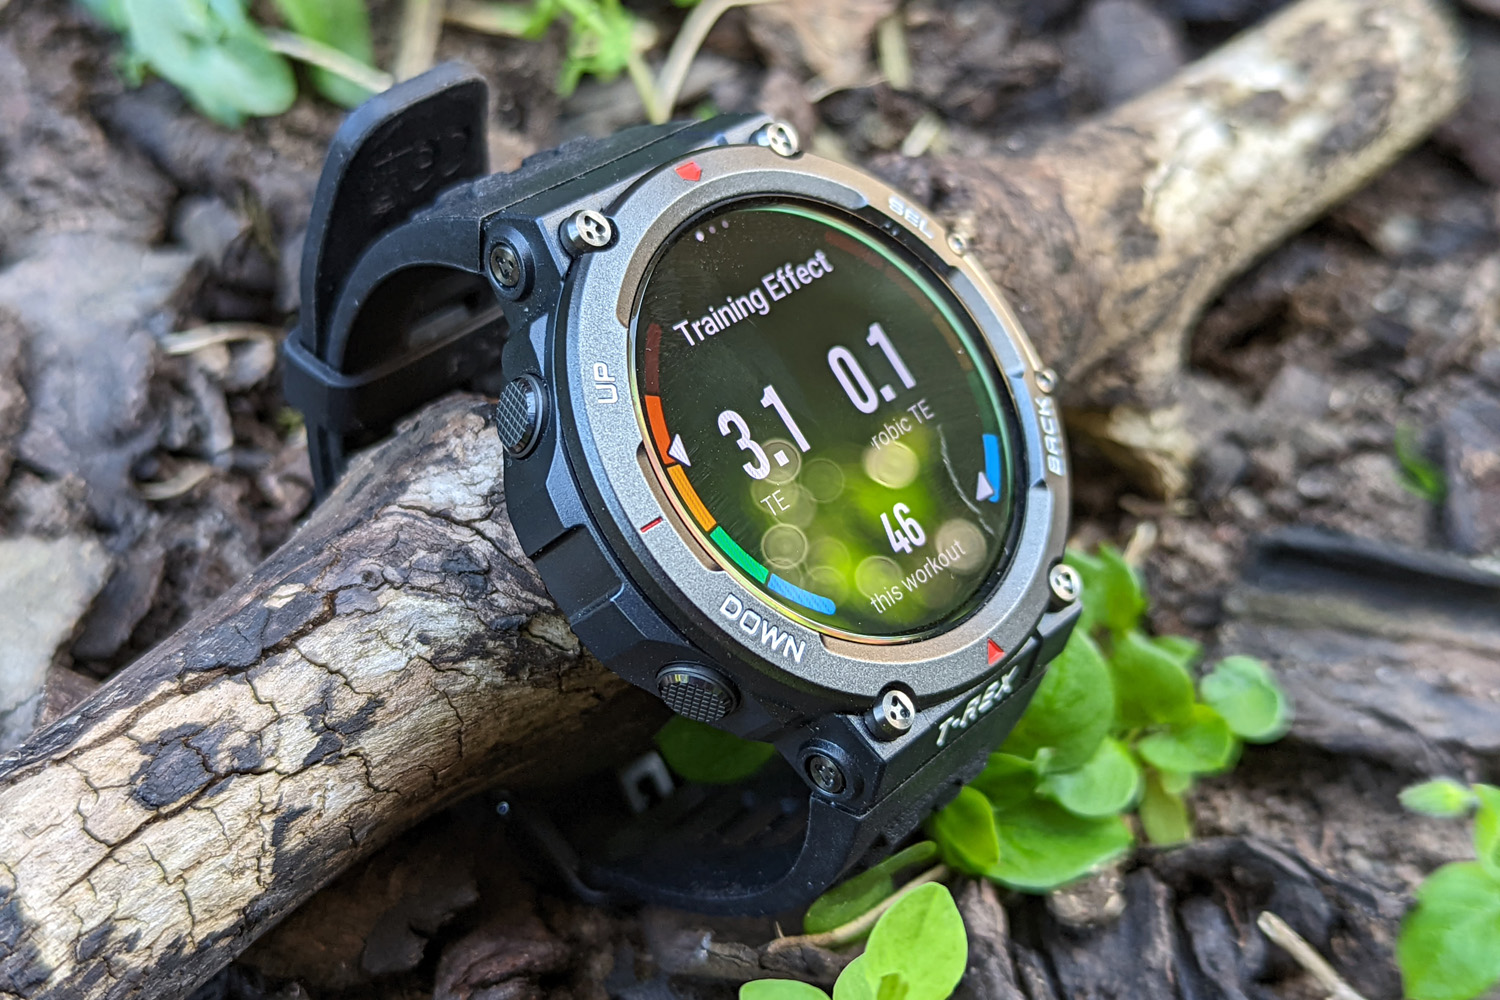 Goodness Cretaceous: A Smartwatch Skeptic's Take on the Amazfit T